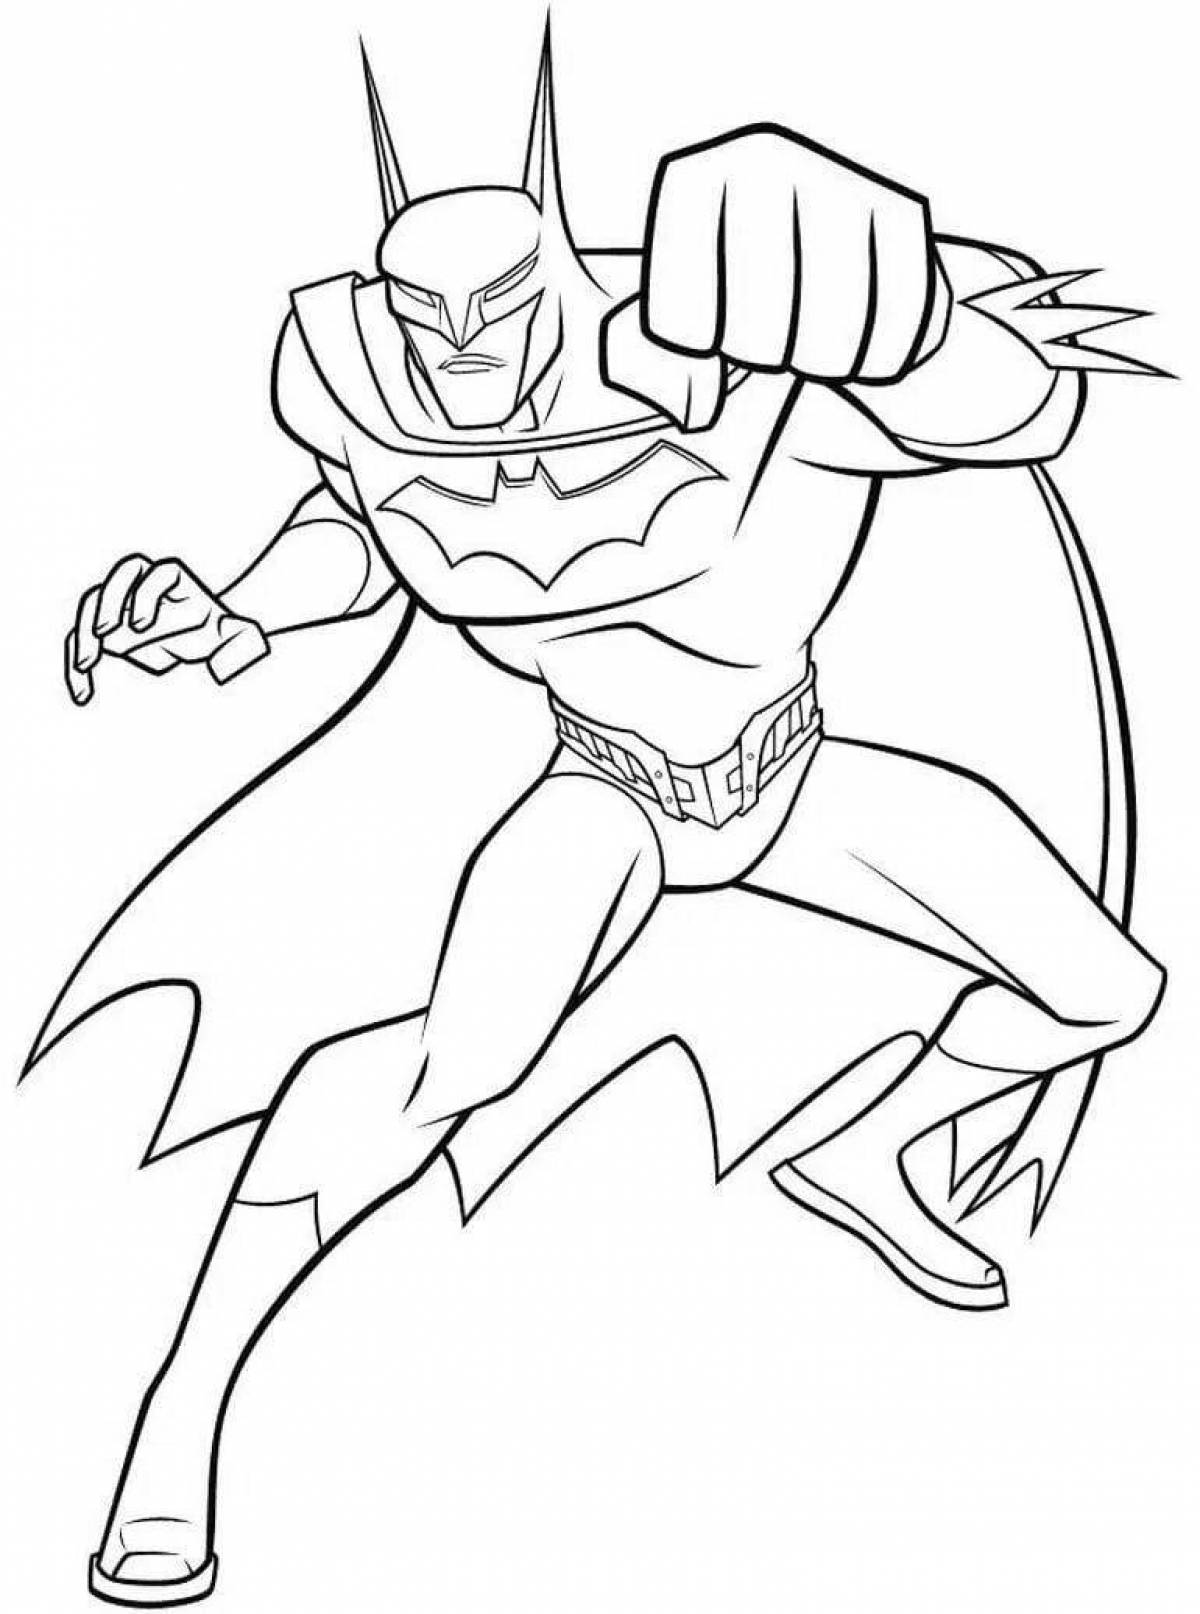 Colorful superhero coloring book for 4-5 year olds